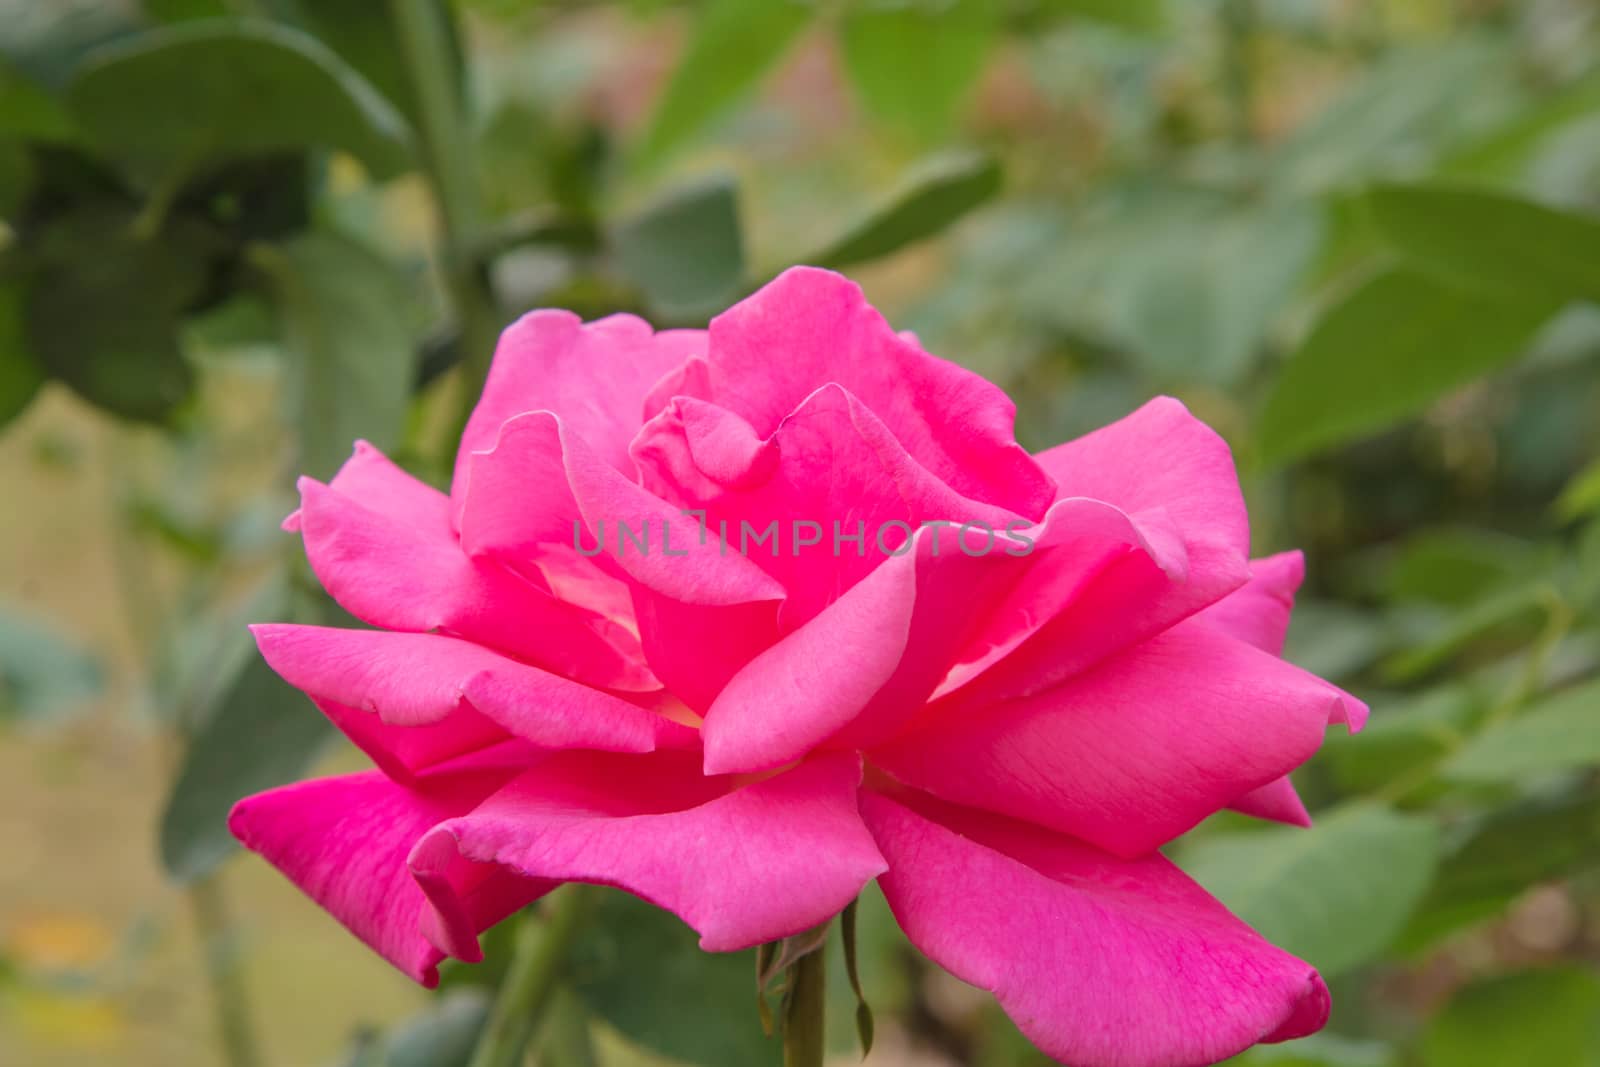 beautiful roses colurful (petals, leaves, bud and an open flower)